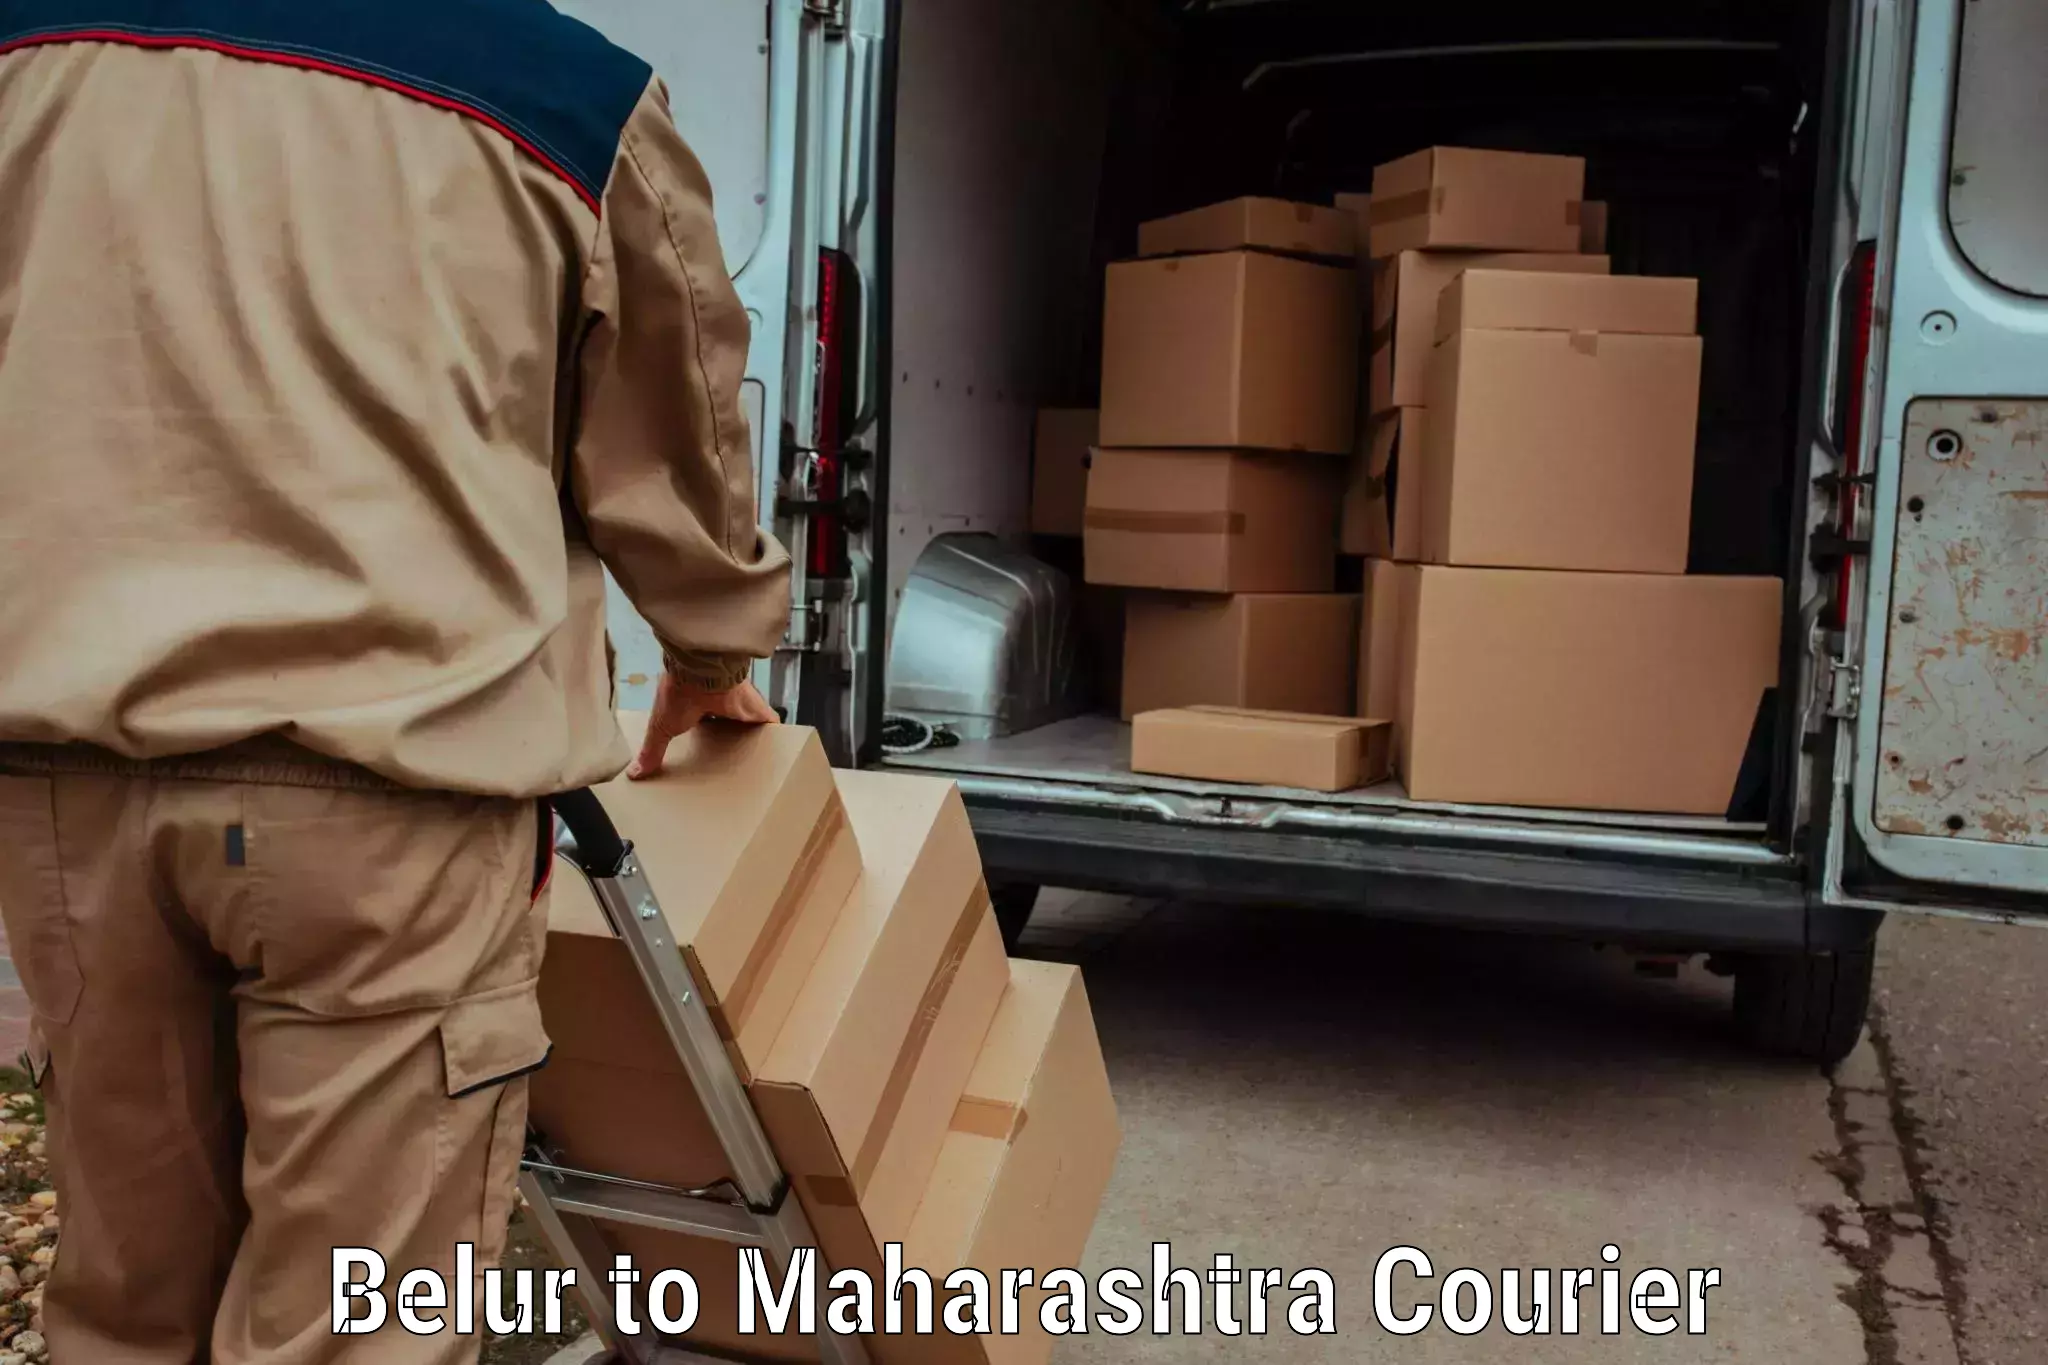 Round-the-clock parcel delivery Belur to Mahabaleshwar